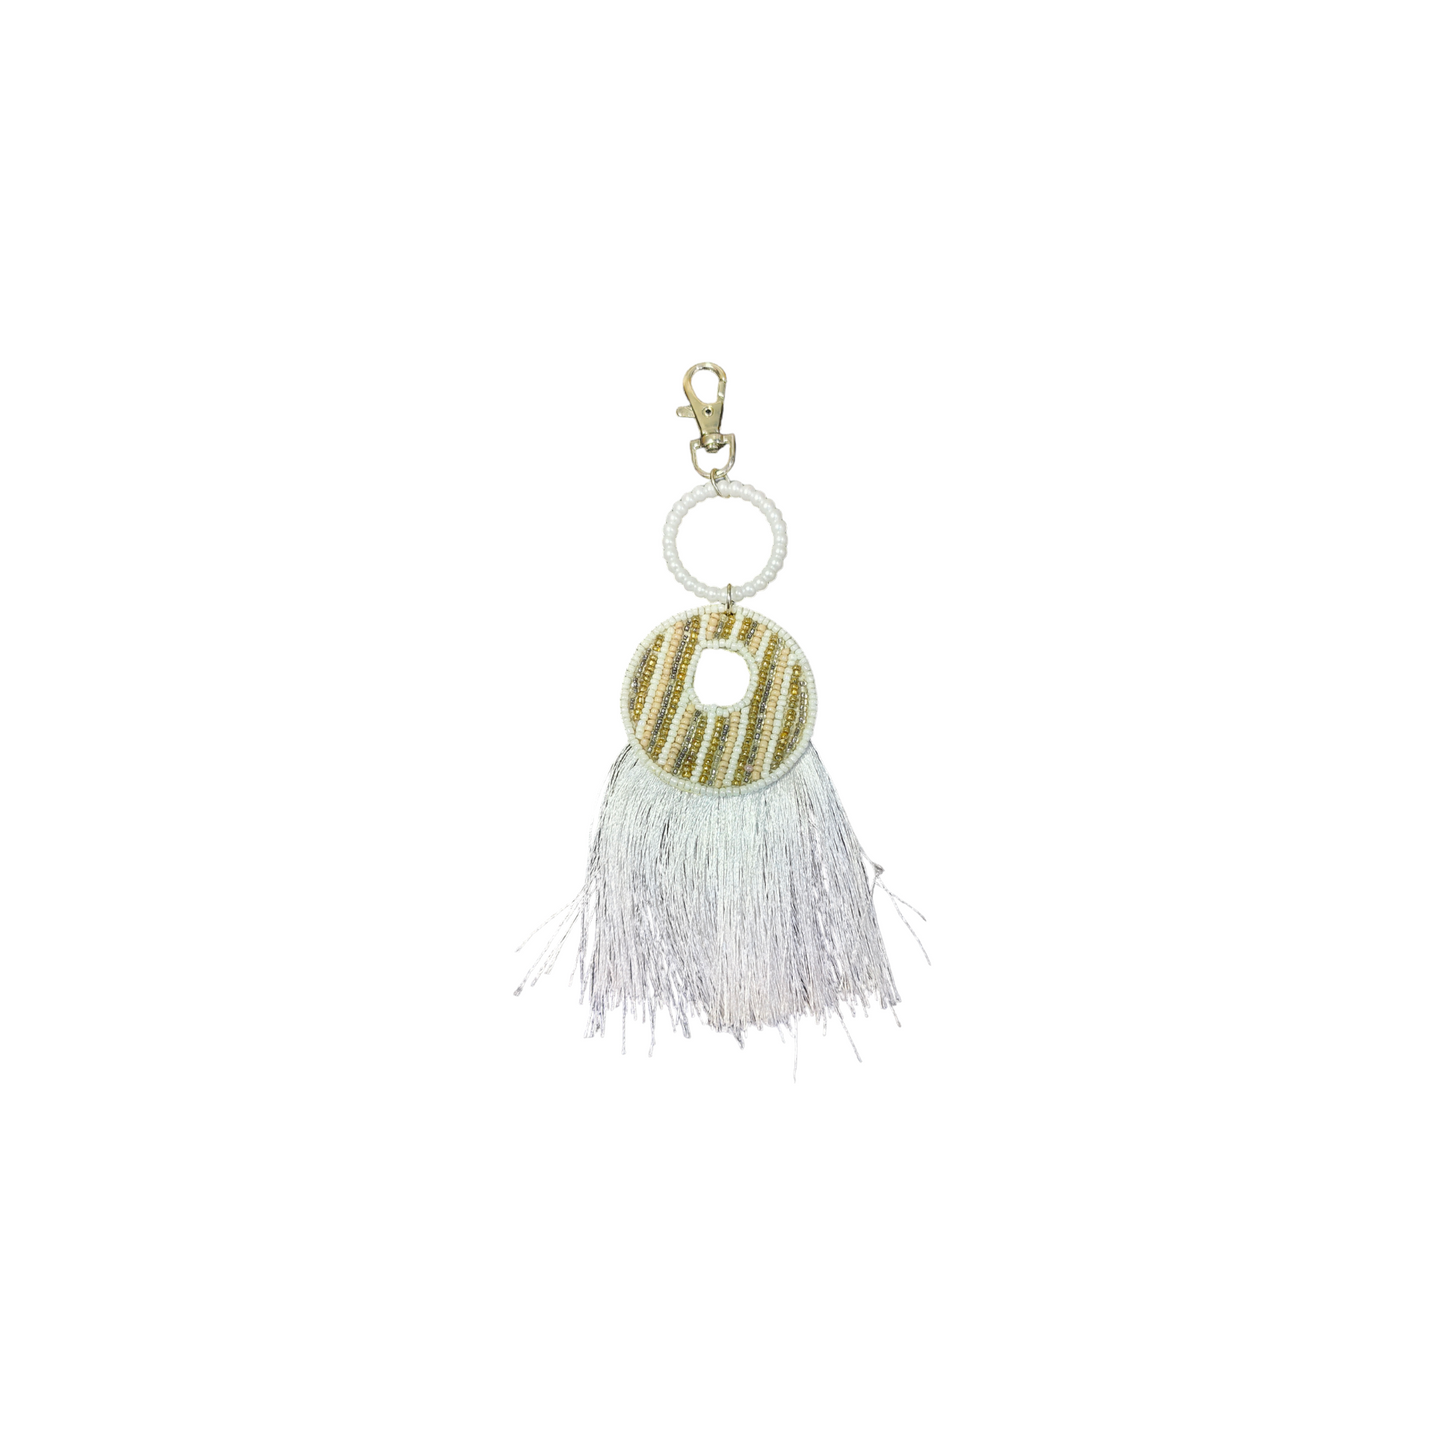 A Vdesi bag charm that will elevate your bag's look. 